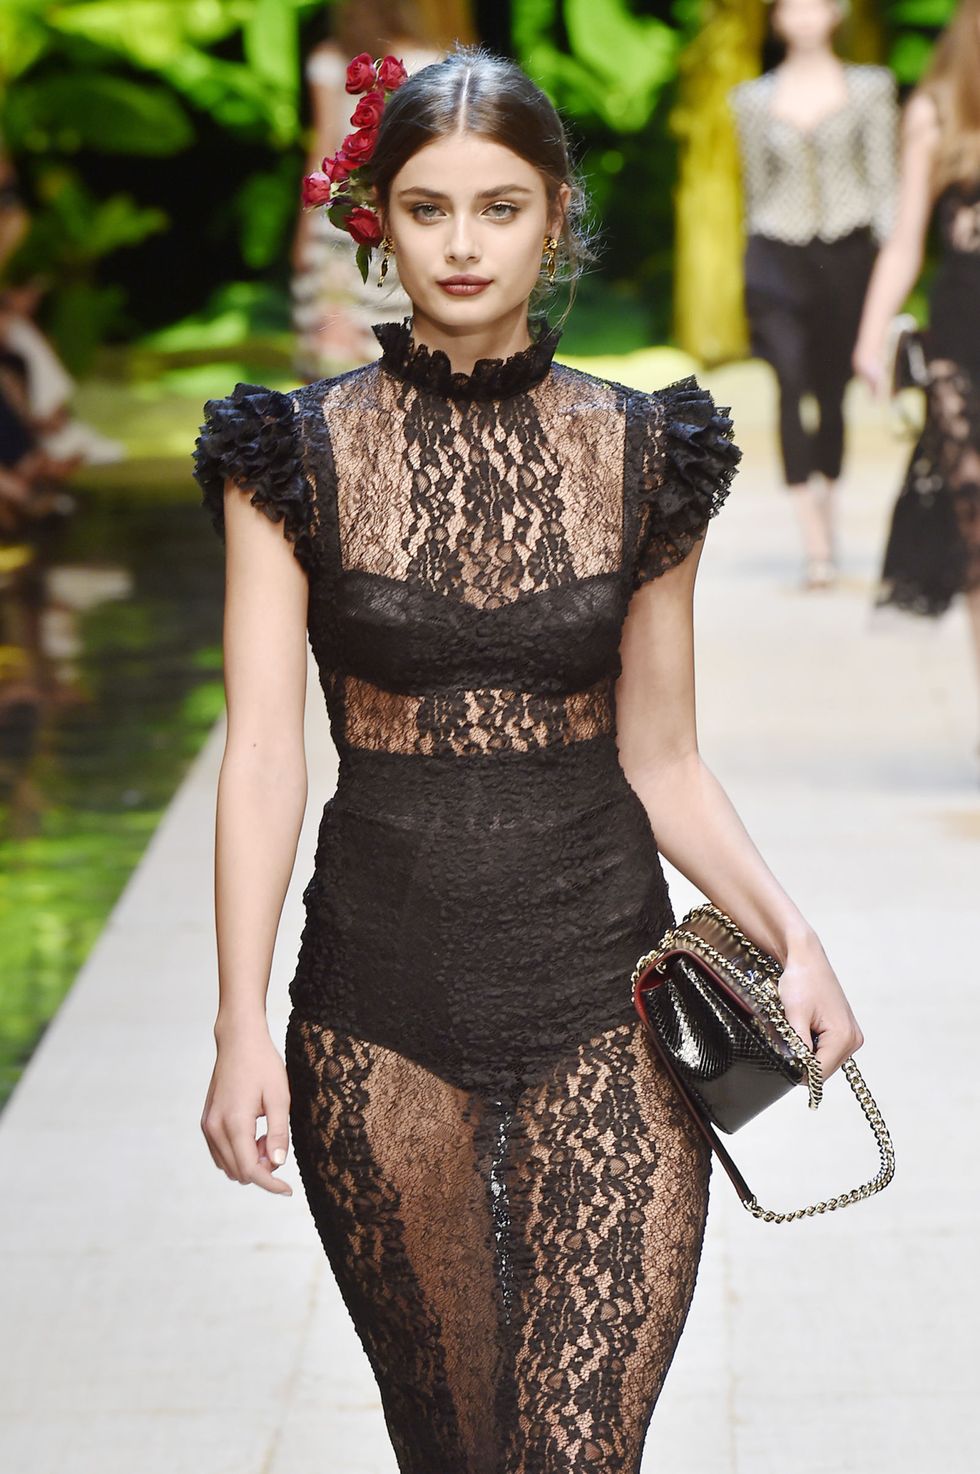 MILAN, ITALY - SEPTEMBER 25:  Model Taylor Hill walks the runway at the Dolce &amp; Gabbana Spring Summer 2017 fashion show during Milan Fashion Week on September 25, 2016 in Milan, Italy.  (Photo by Catwalking/Getty Images)